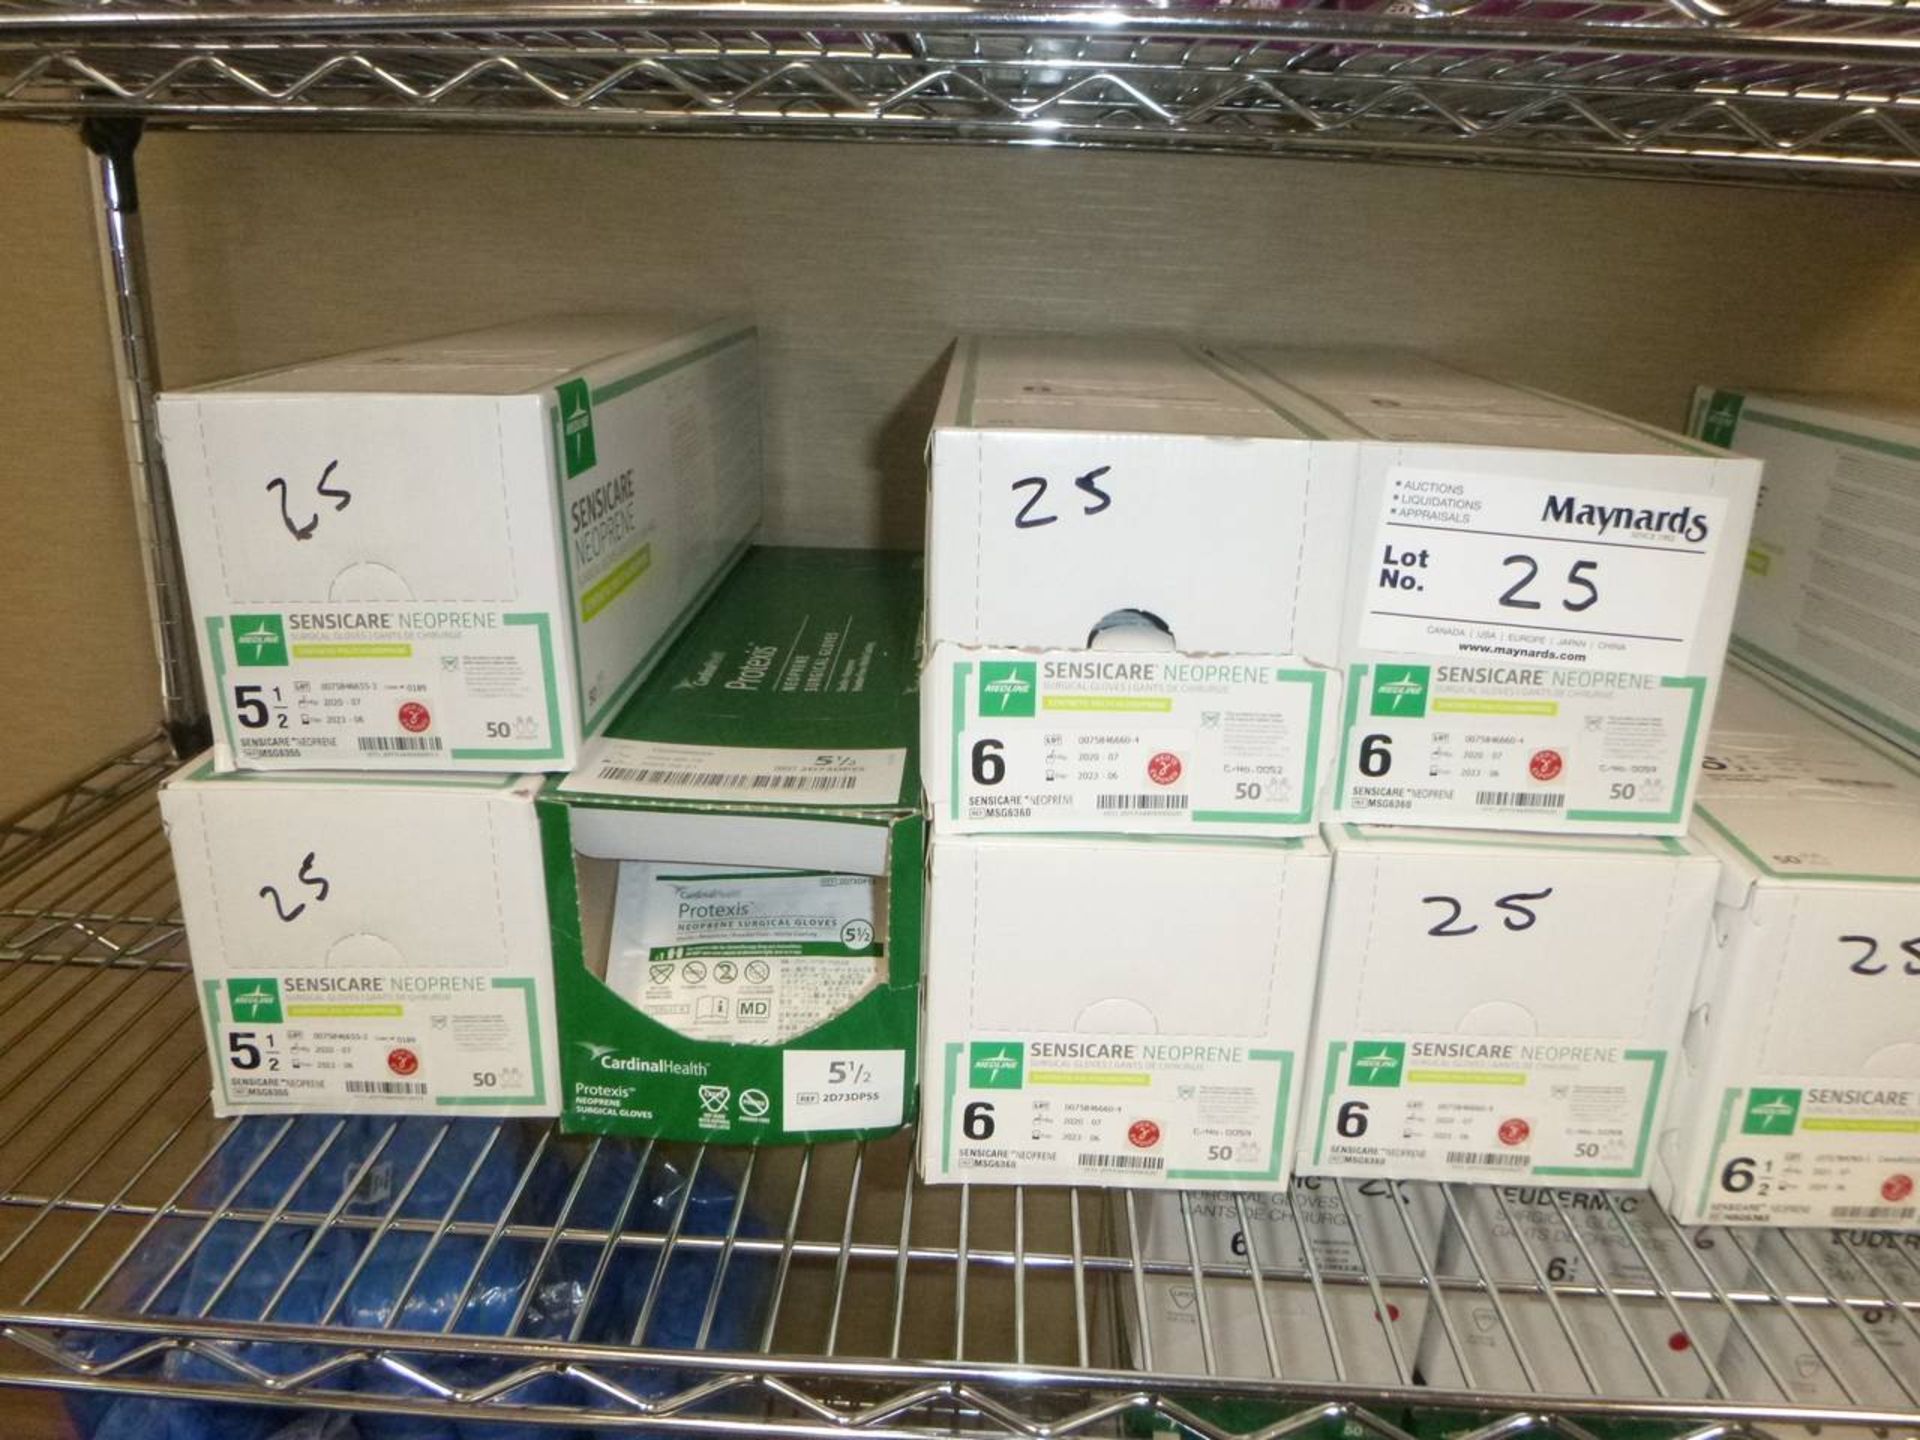 Sensicare Boxes of surgical gloves 5 1/2-8 - Image 2 of 3